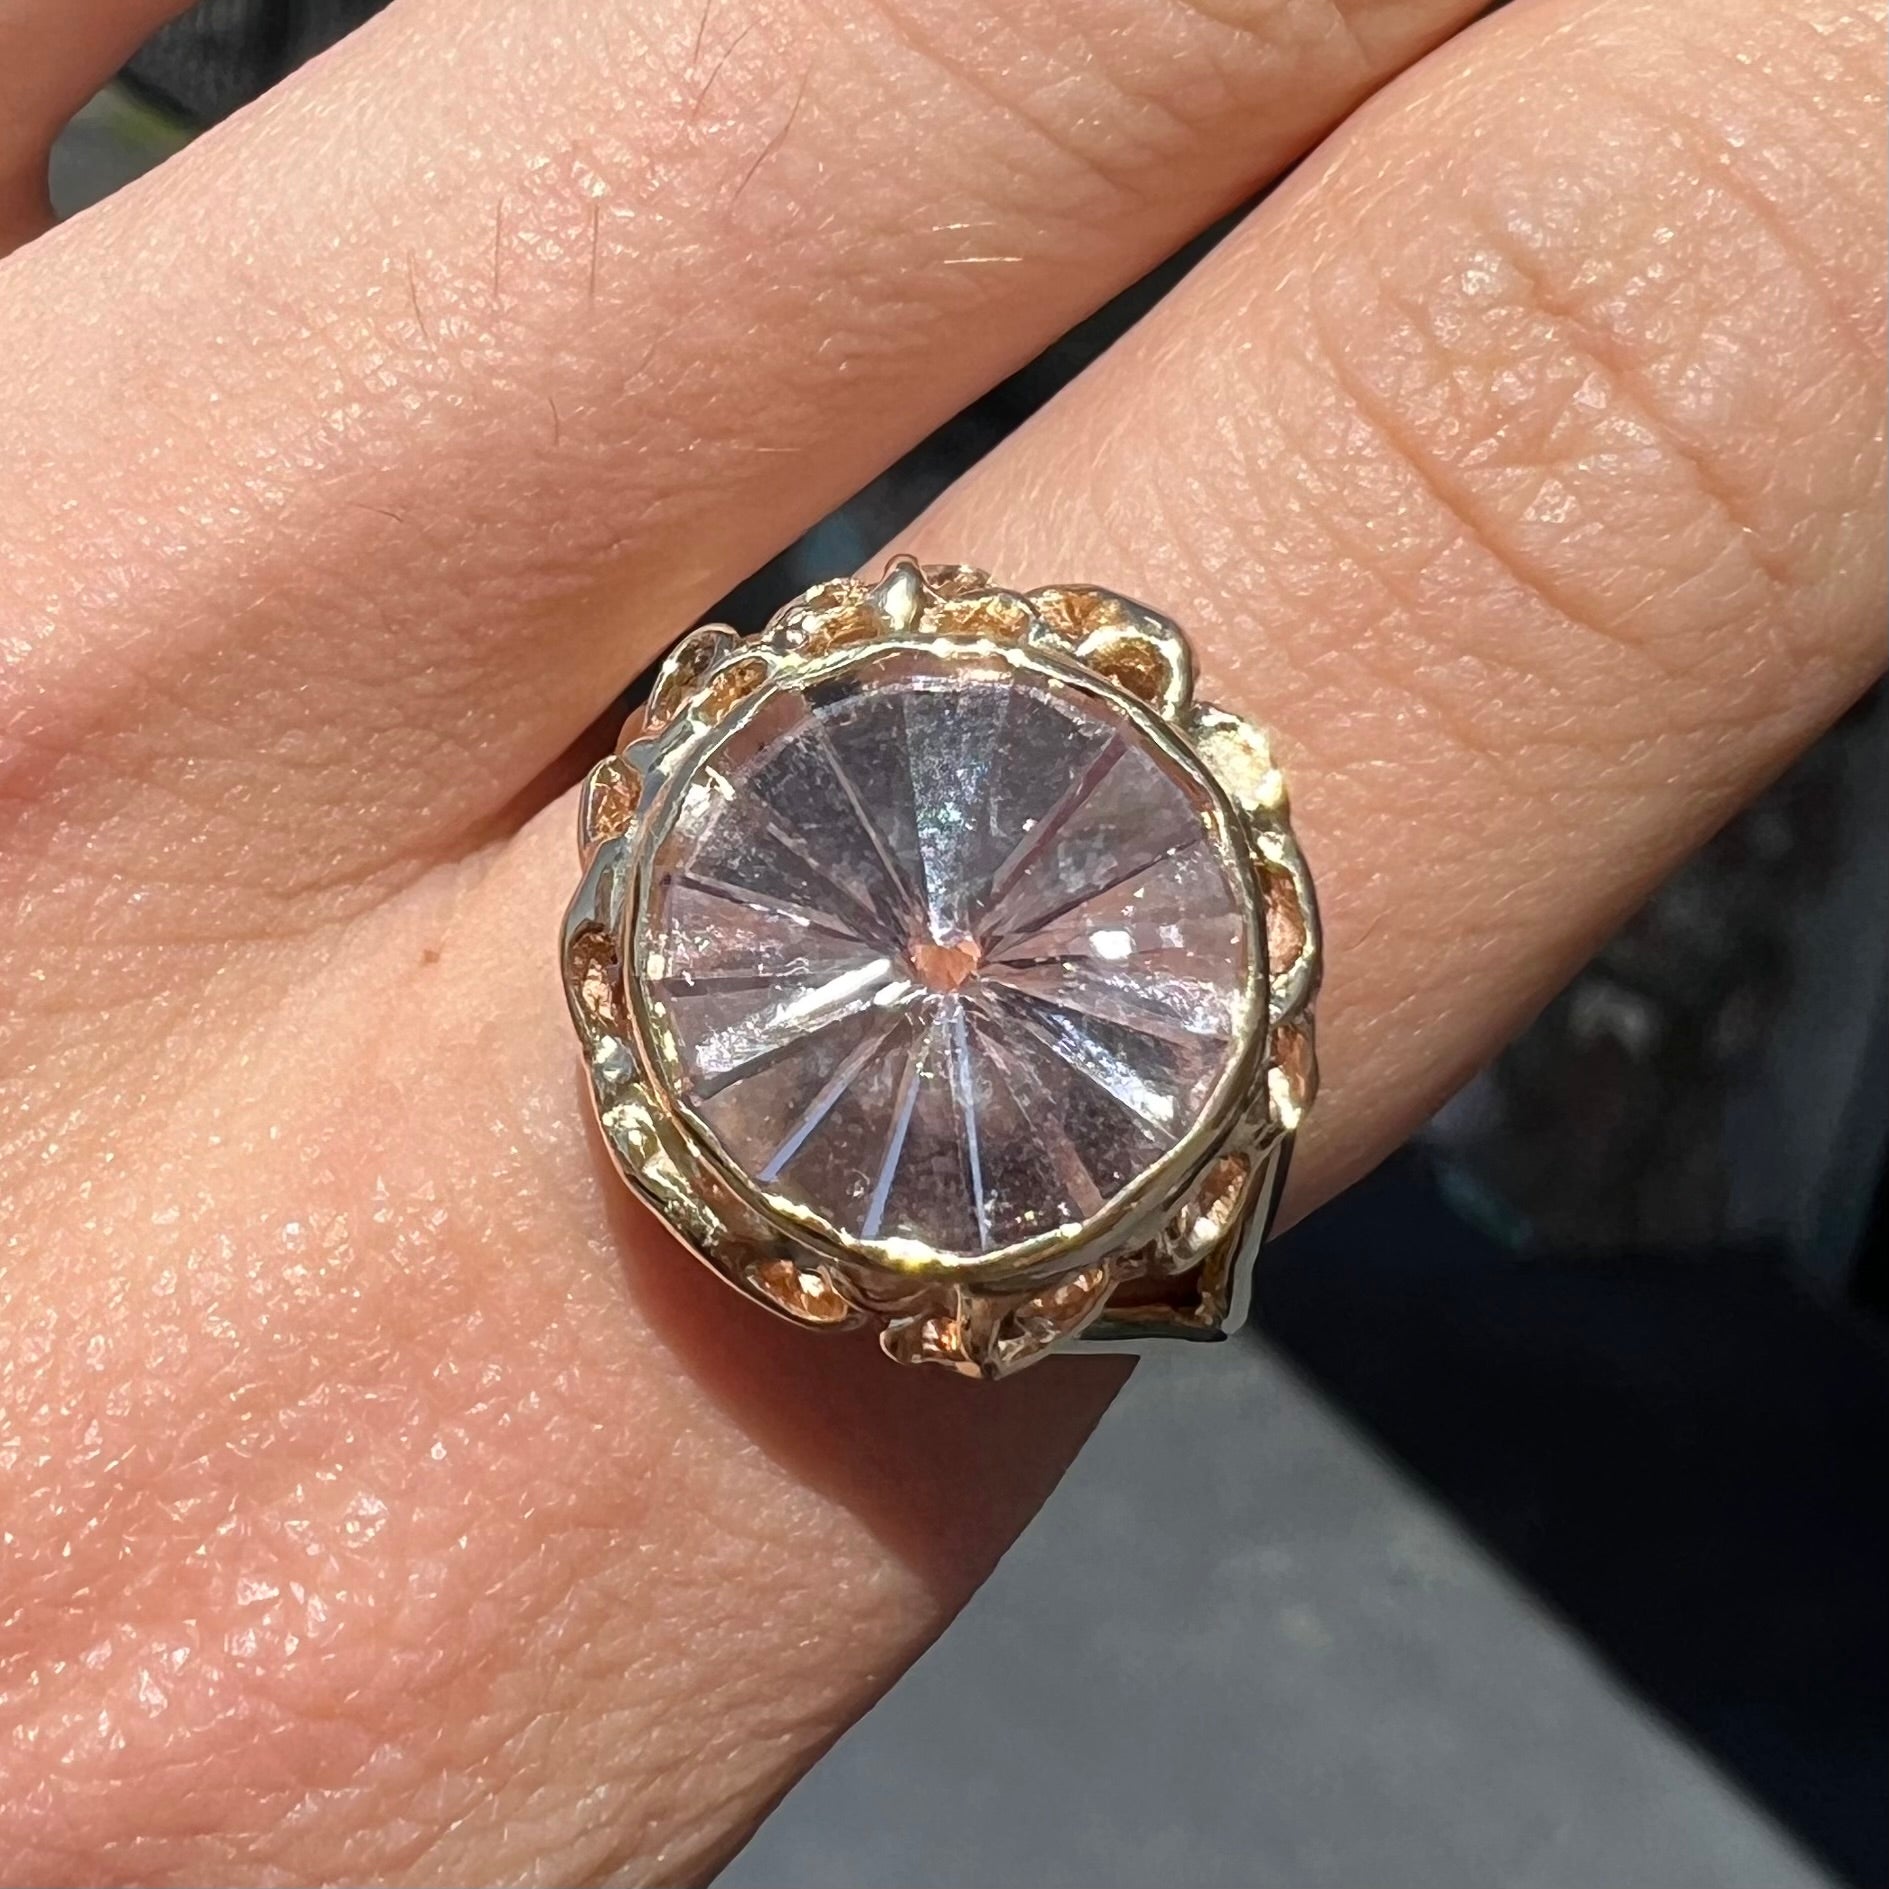 A ladies' yellow gold solitaire ring bezel set with a modified bud cut morganite gemstone.